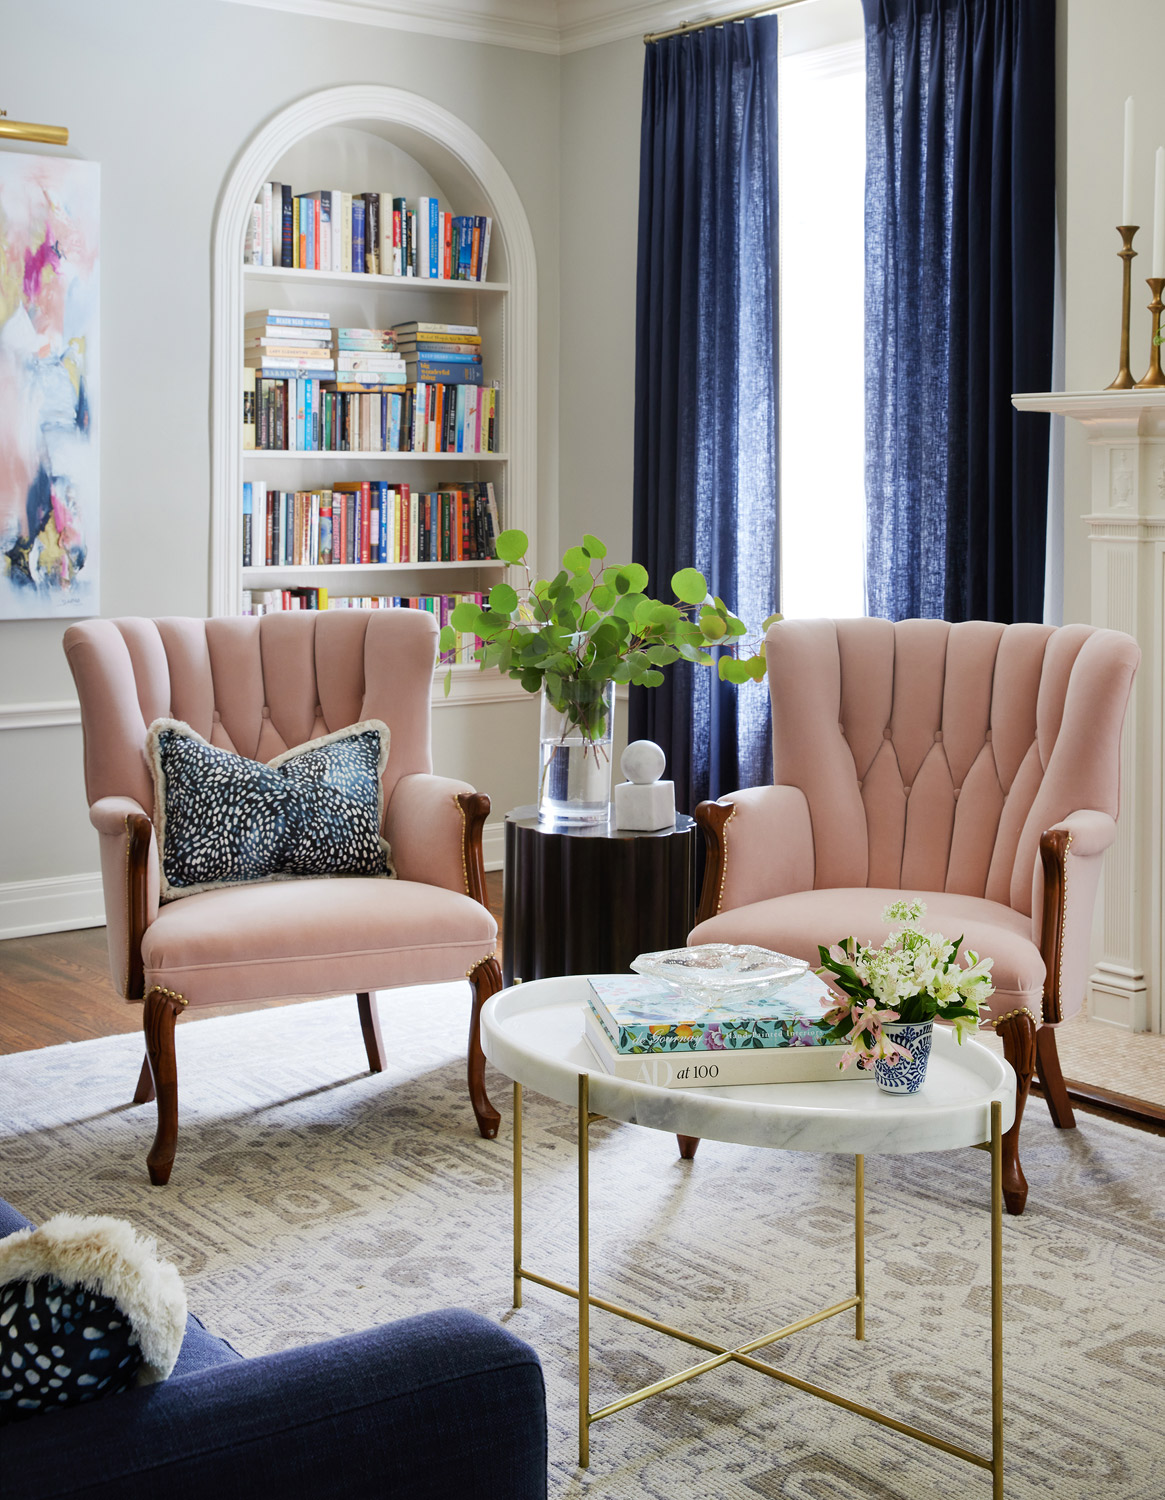 Andrea Leigh Interiors photographed by interiors photographer Buff Strickland